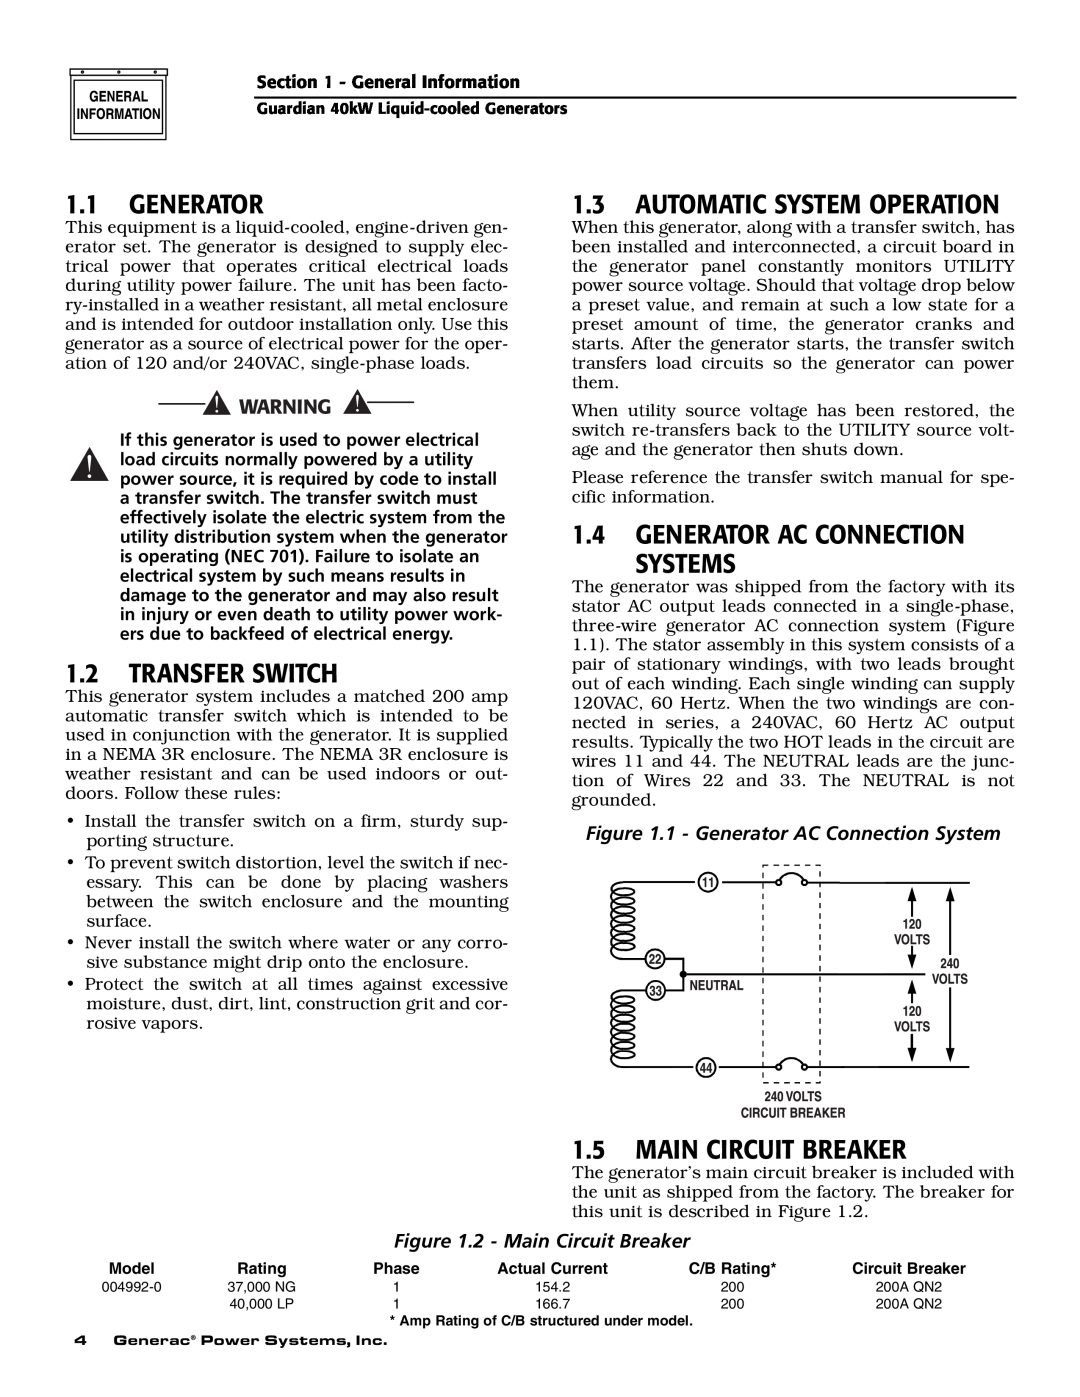 Generac Power Systems 004992-1, 004992-0 owner manual 1.1GENERATOR, 1.2TRANSFER SWITCH, 1.3AUTOMATIC SYSTEM OPERATION 